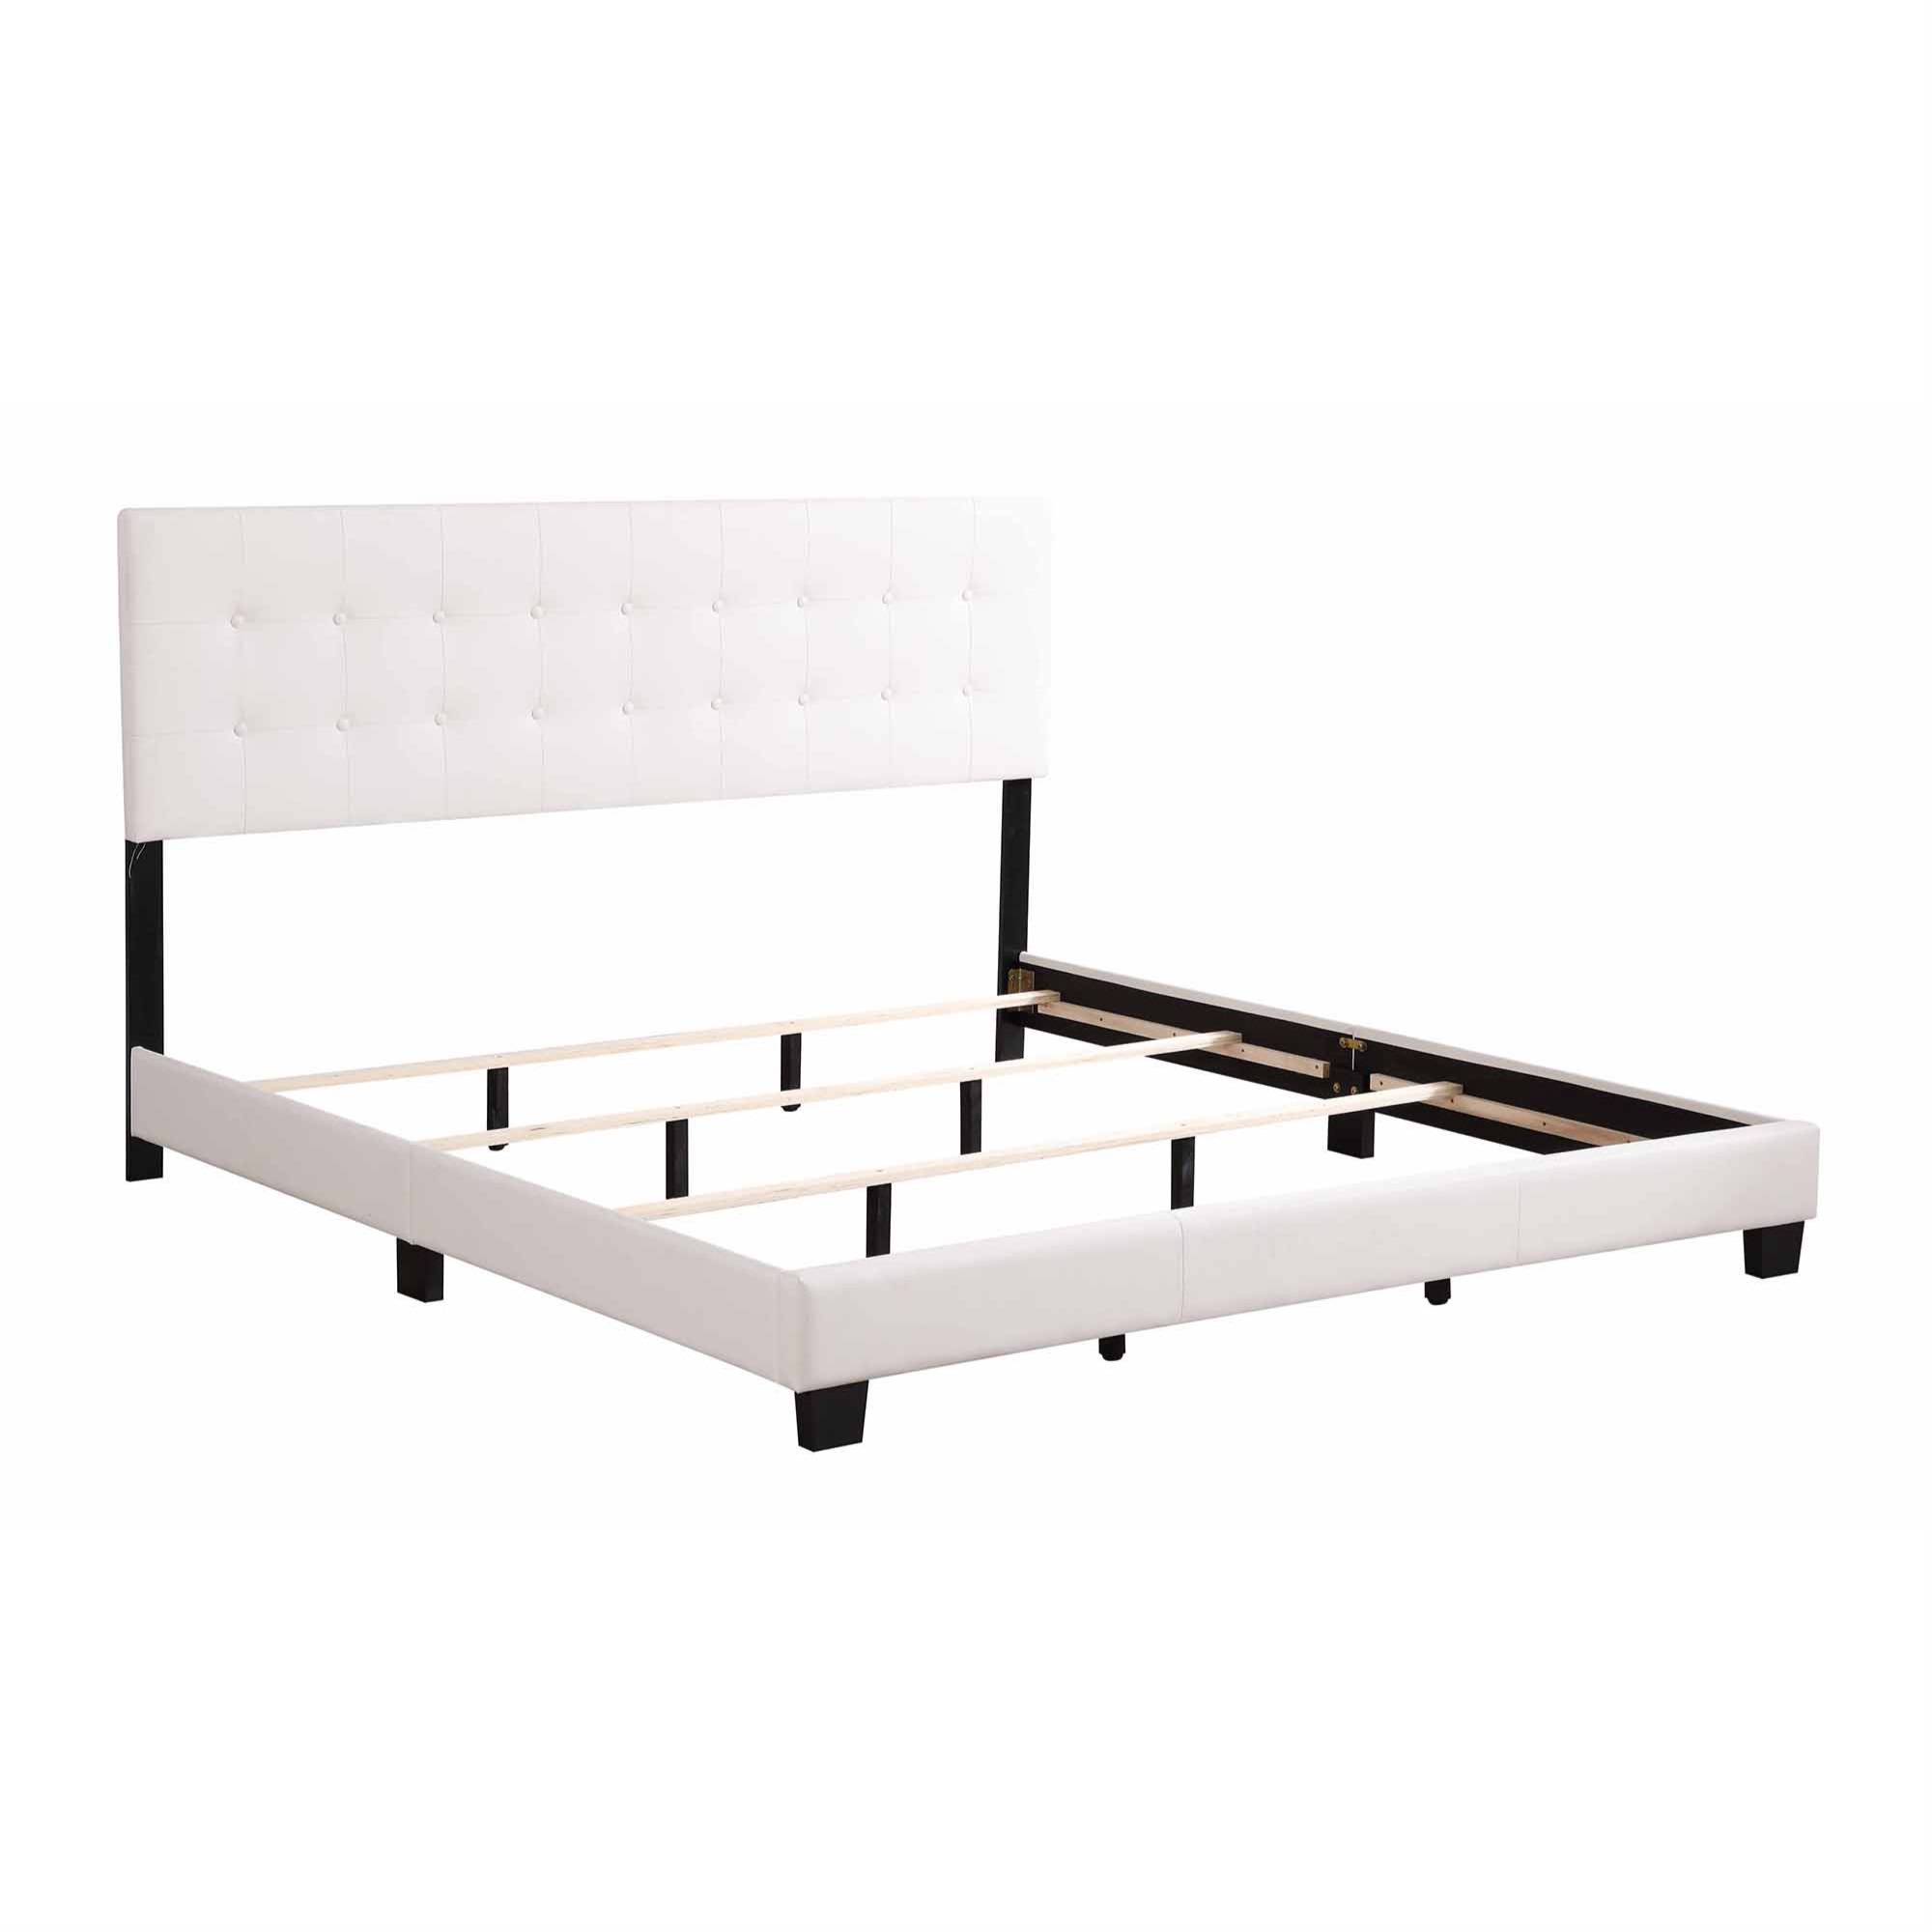 Passion Furniture  Caldwell Faux Leather Button Tufted Panel Bed, White - King Size - image 3 of 5